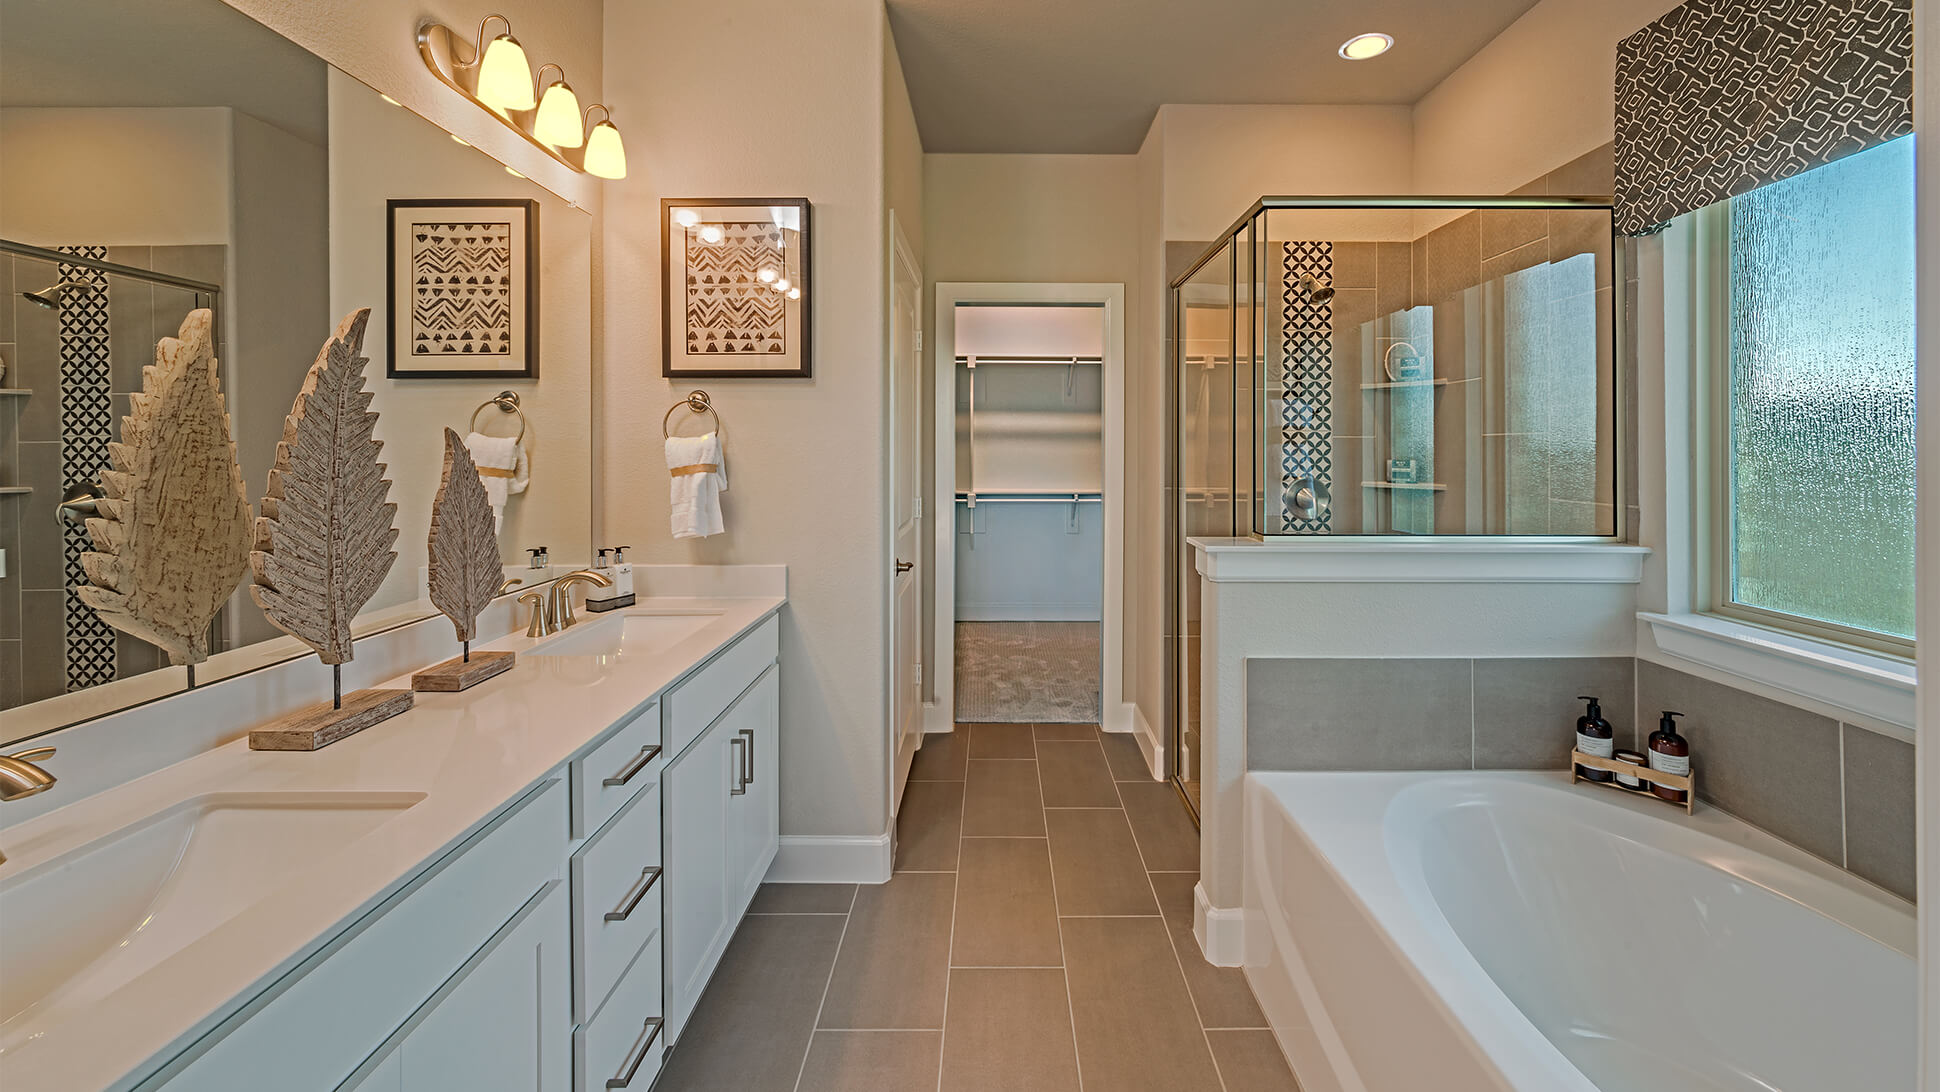 A modern bathroom in new homes in Mansfield, TX, with a dual vanity, bathtub, and a separate shower area.